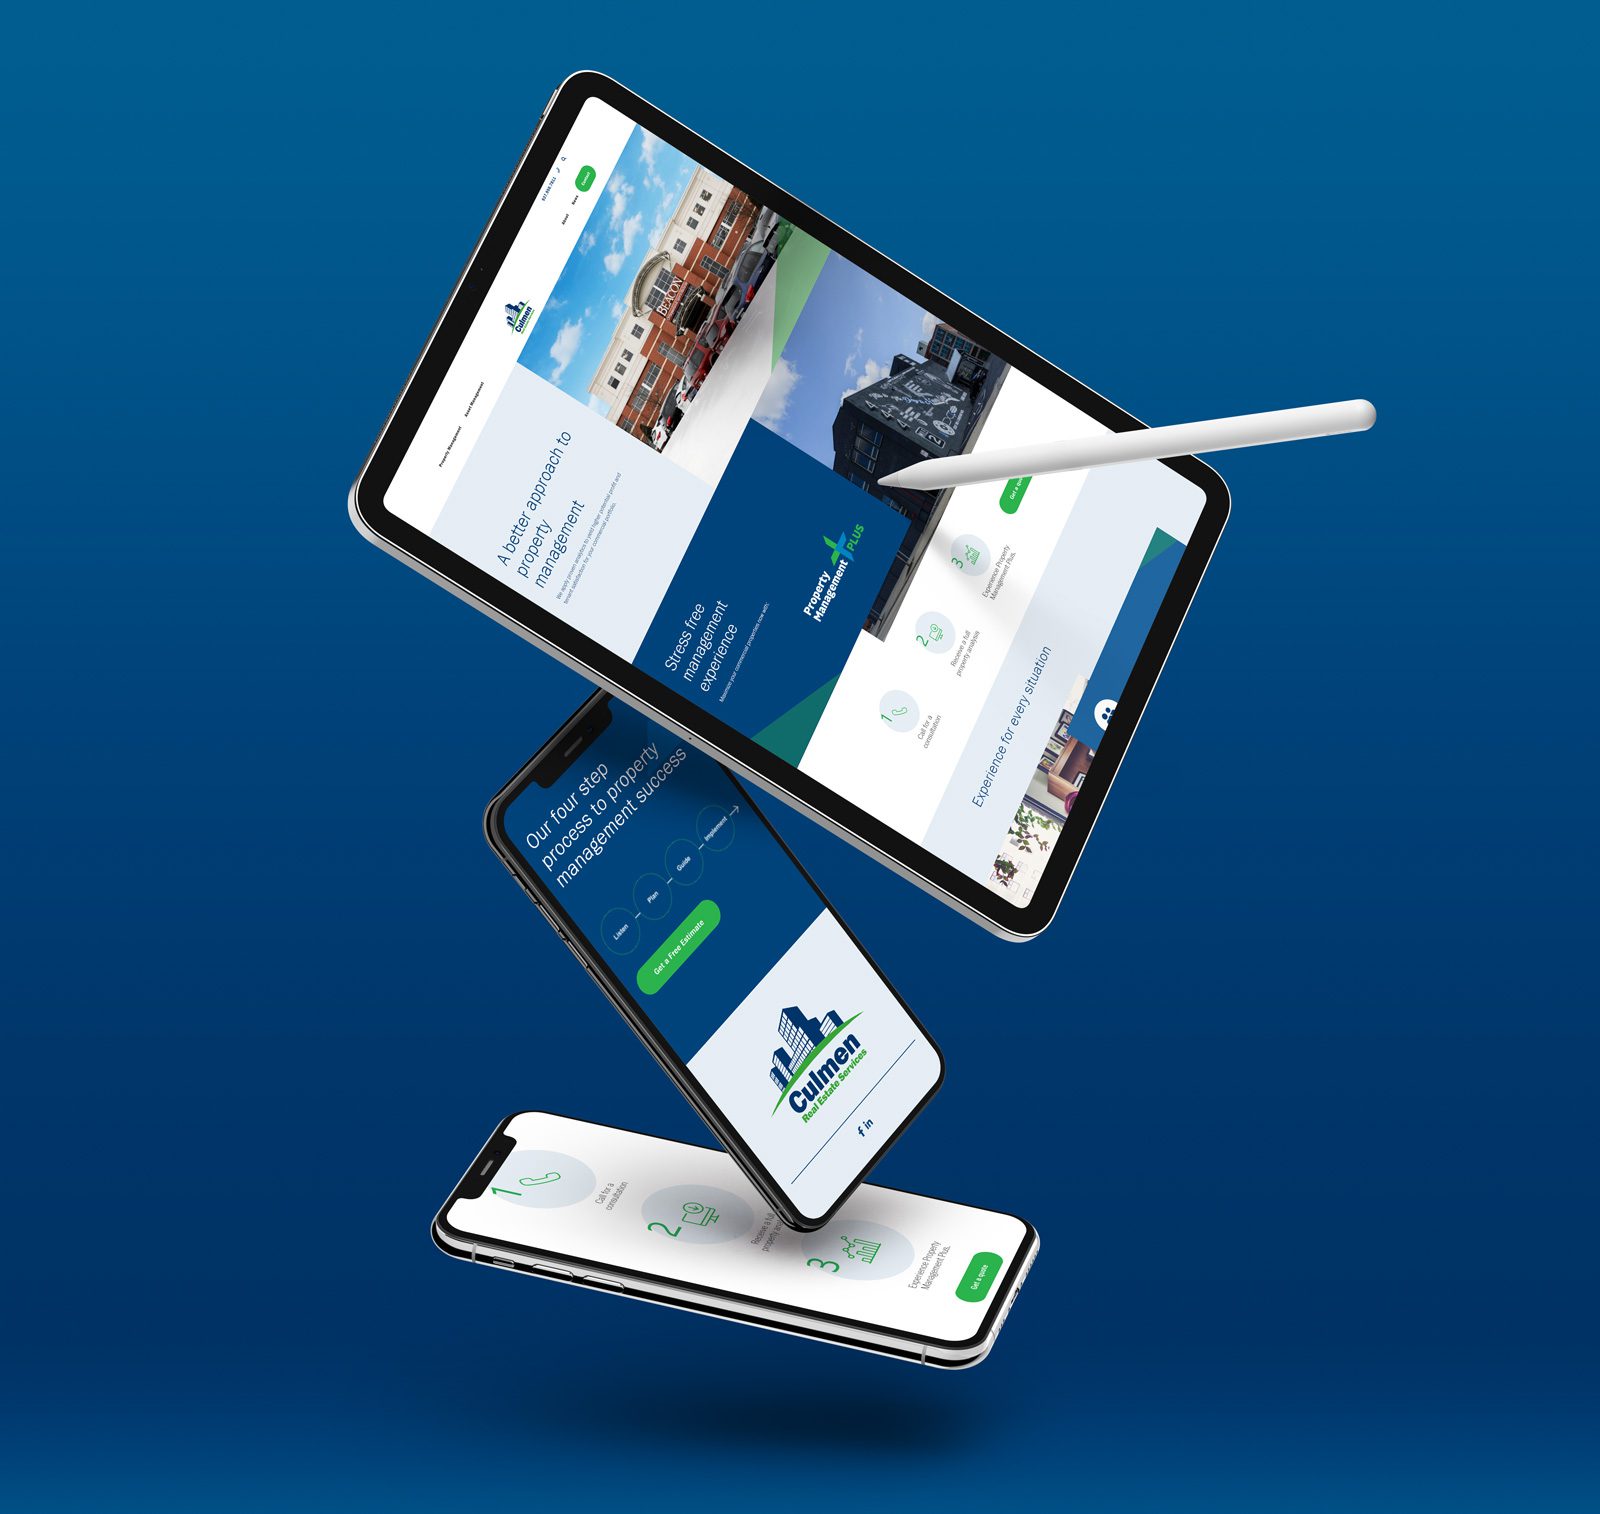 Culmen Services website design shown on the screens of various mobile devices